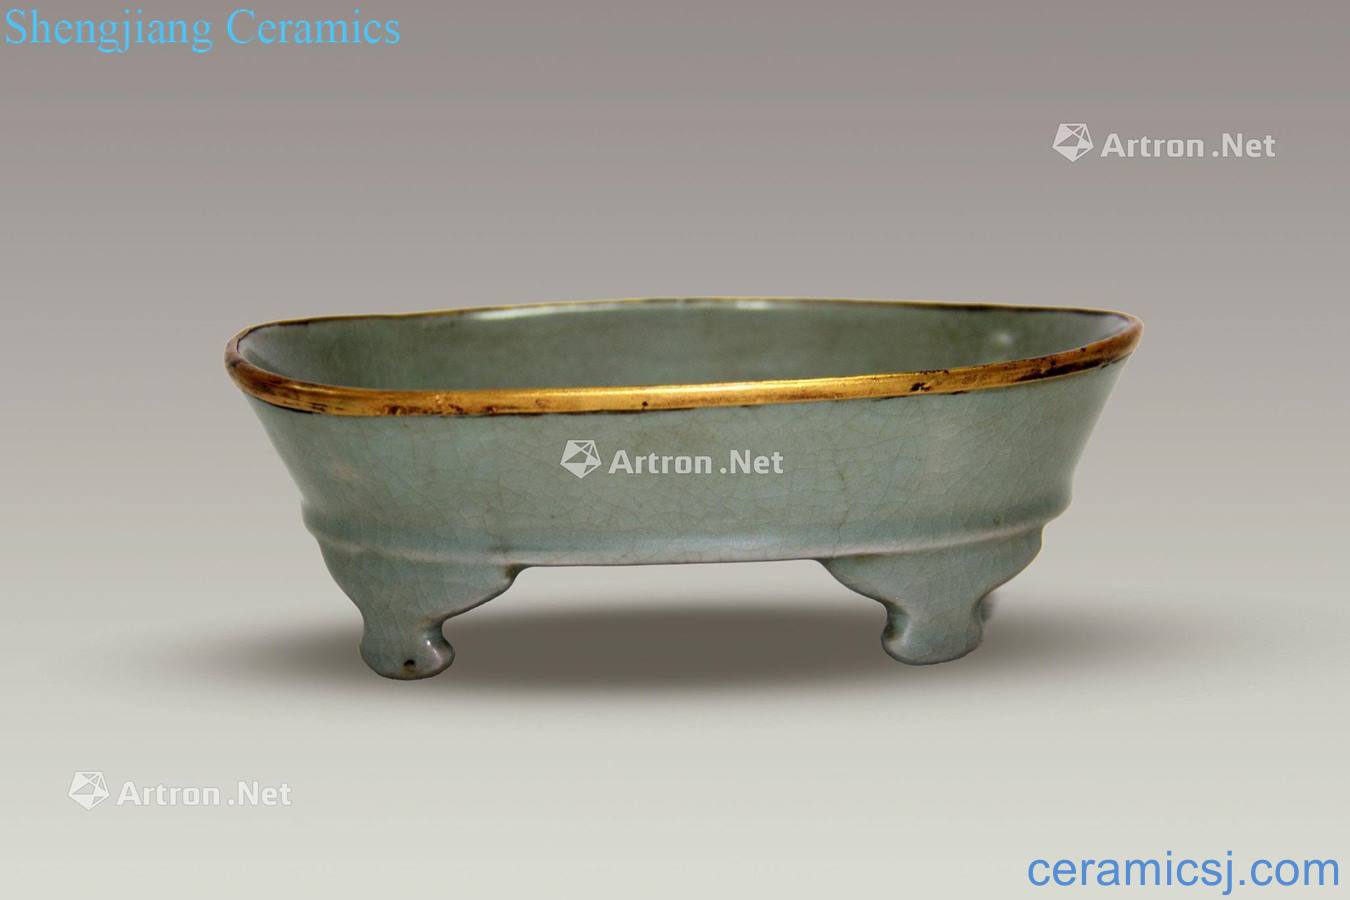 The song dynasty porcelain and lane lotus bowl